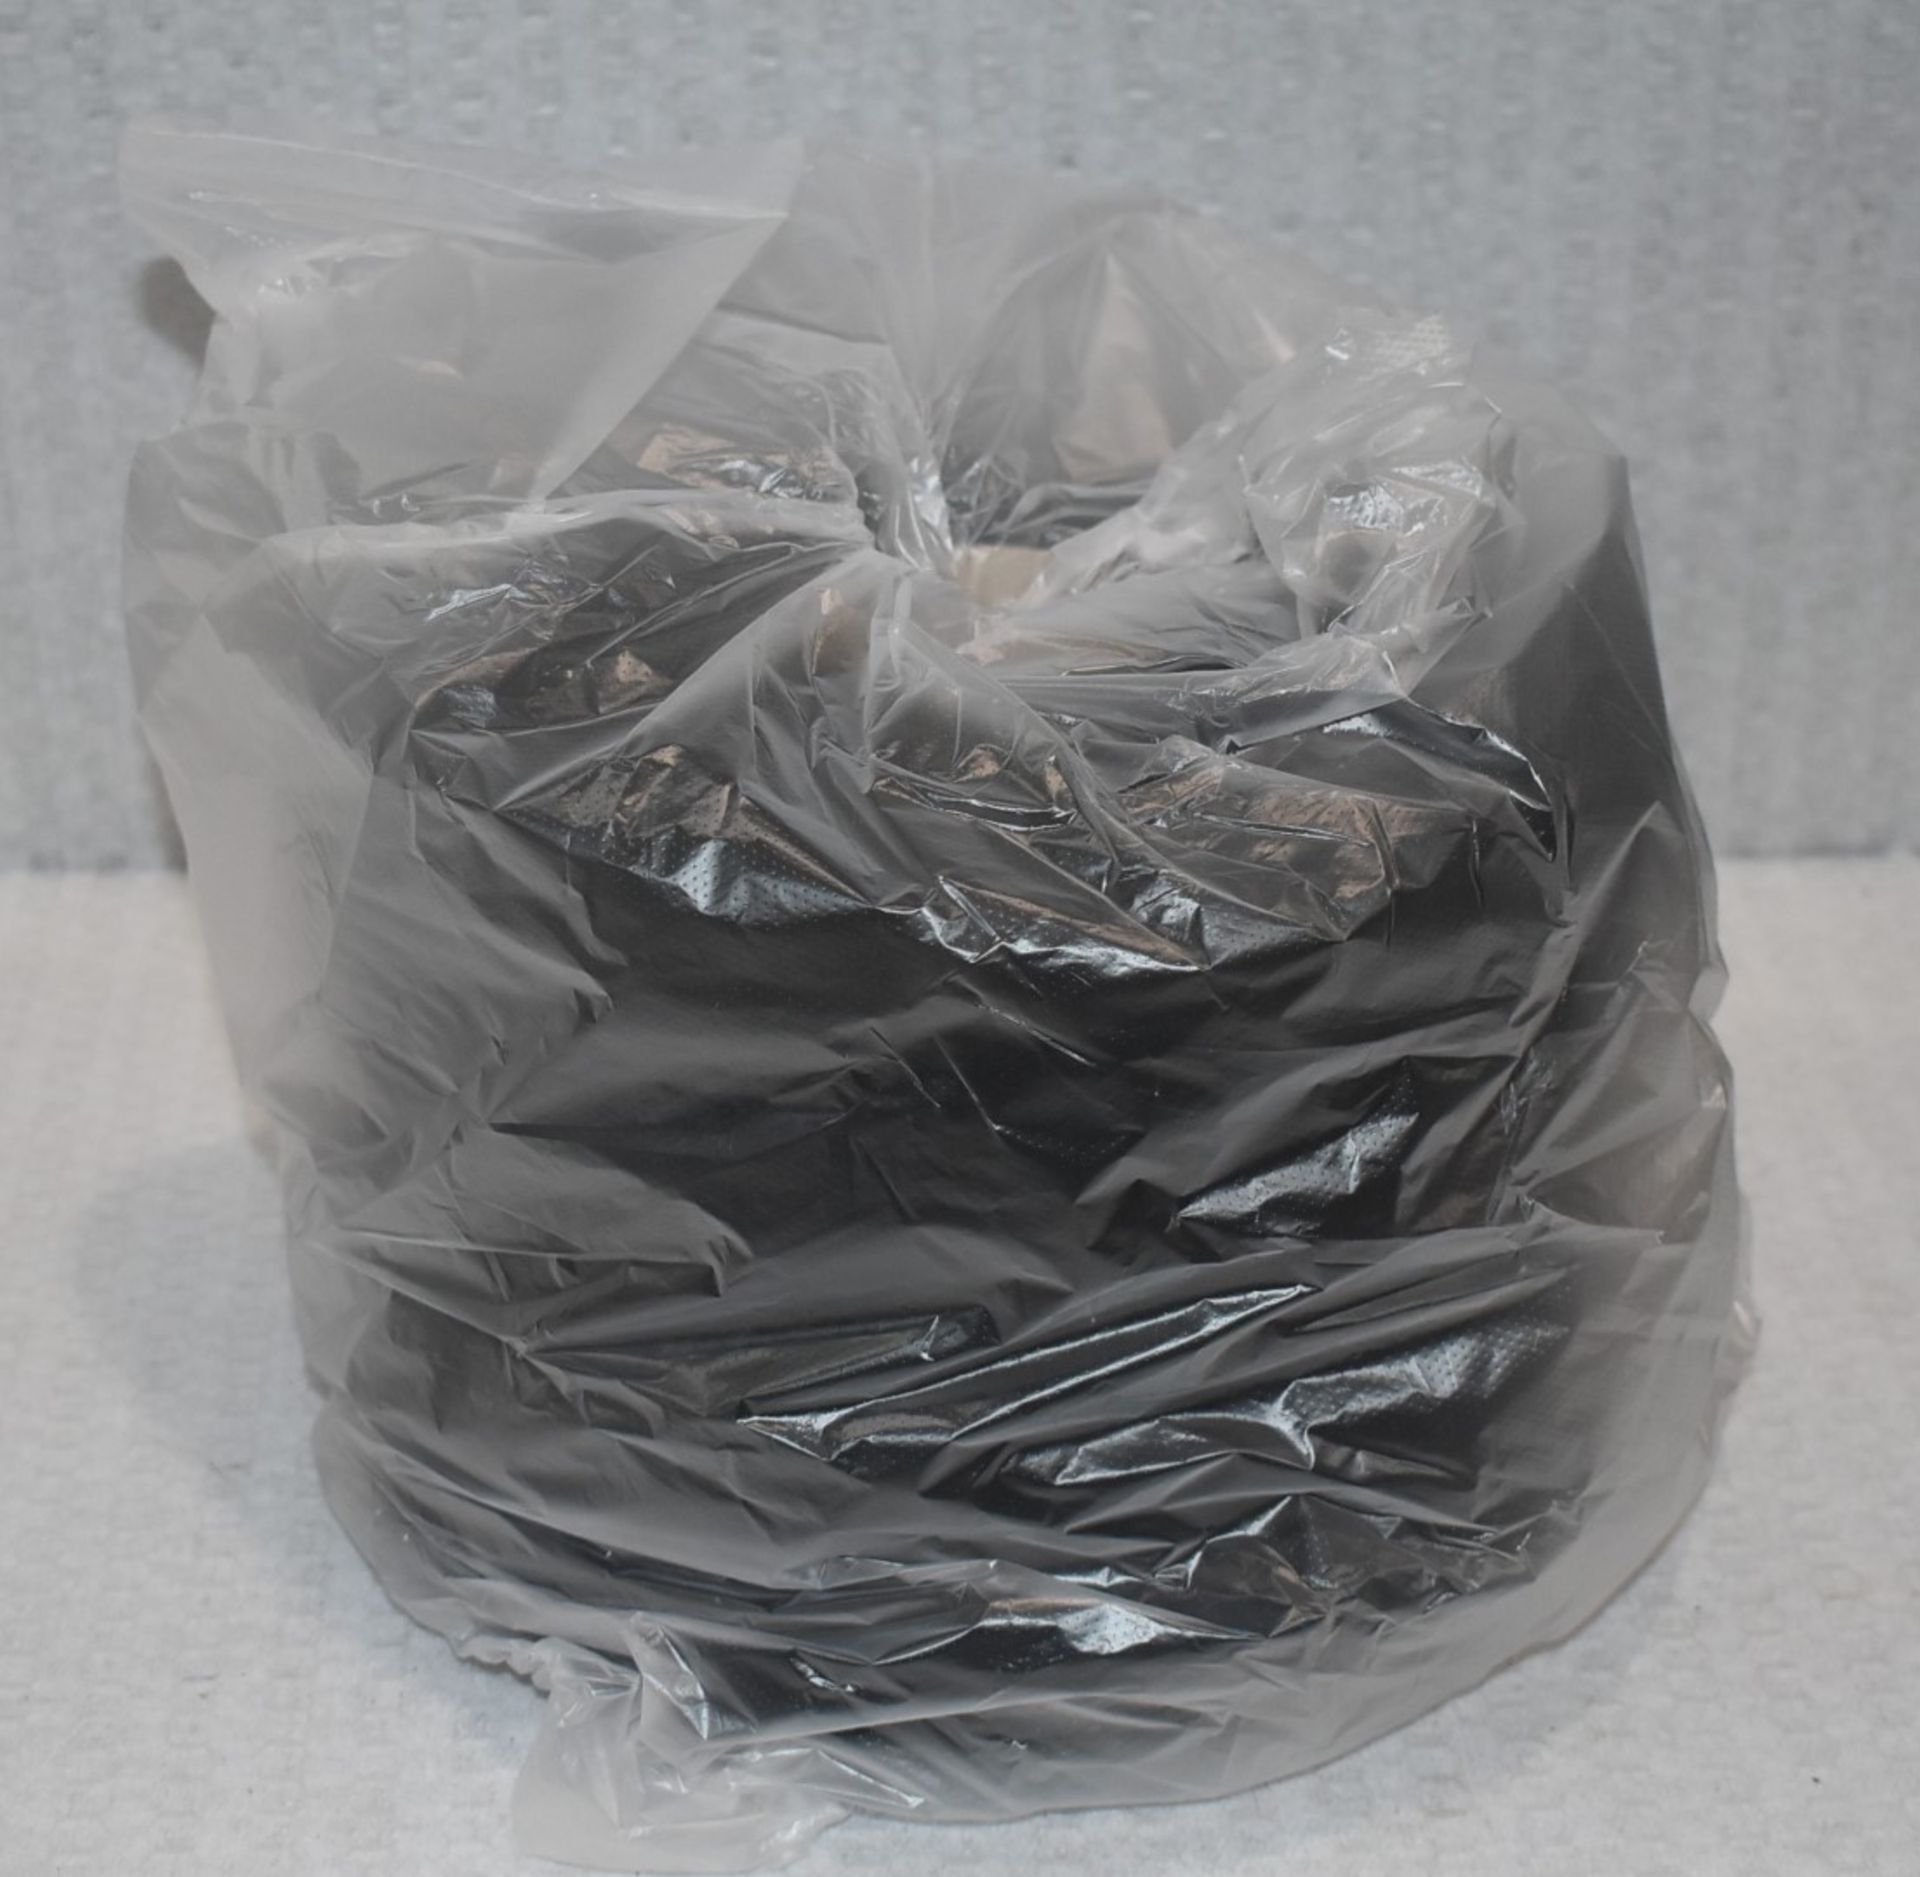 36 x Cones of 1/7,5 Lagona Knitting Yarn - Charcoal - Approx Weight: 2,300g - New Stock ABL Yarn - Image 3 of 9